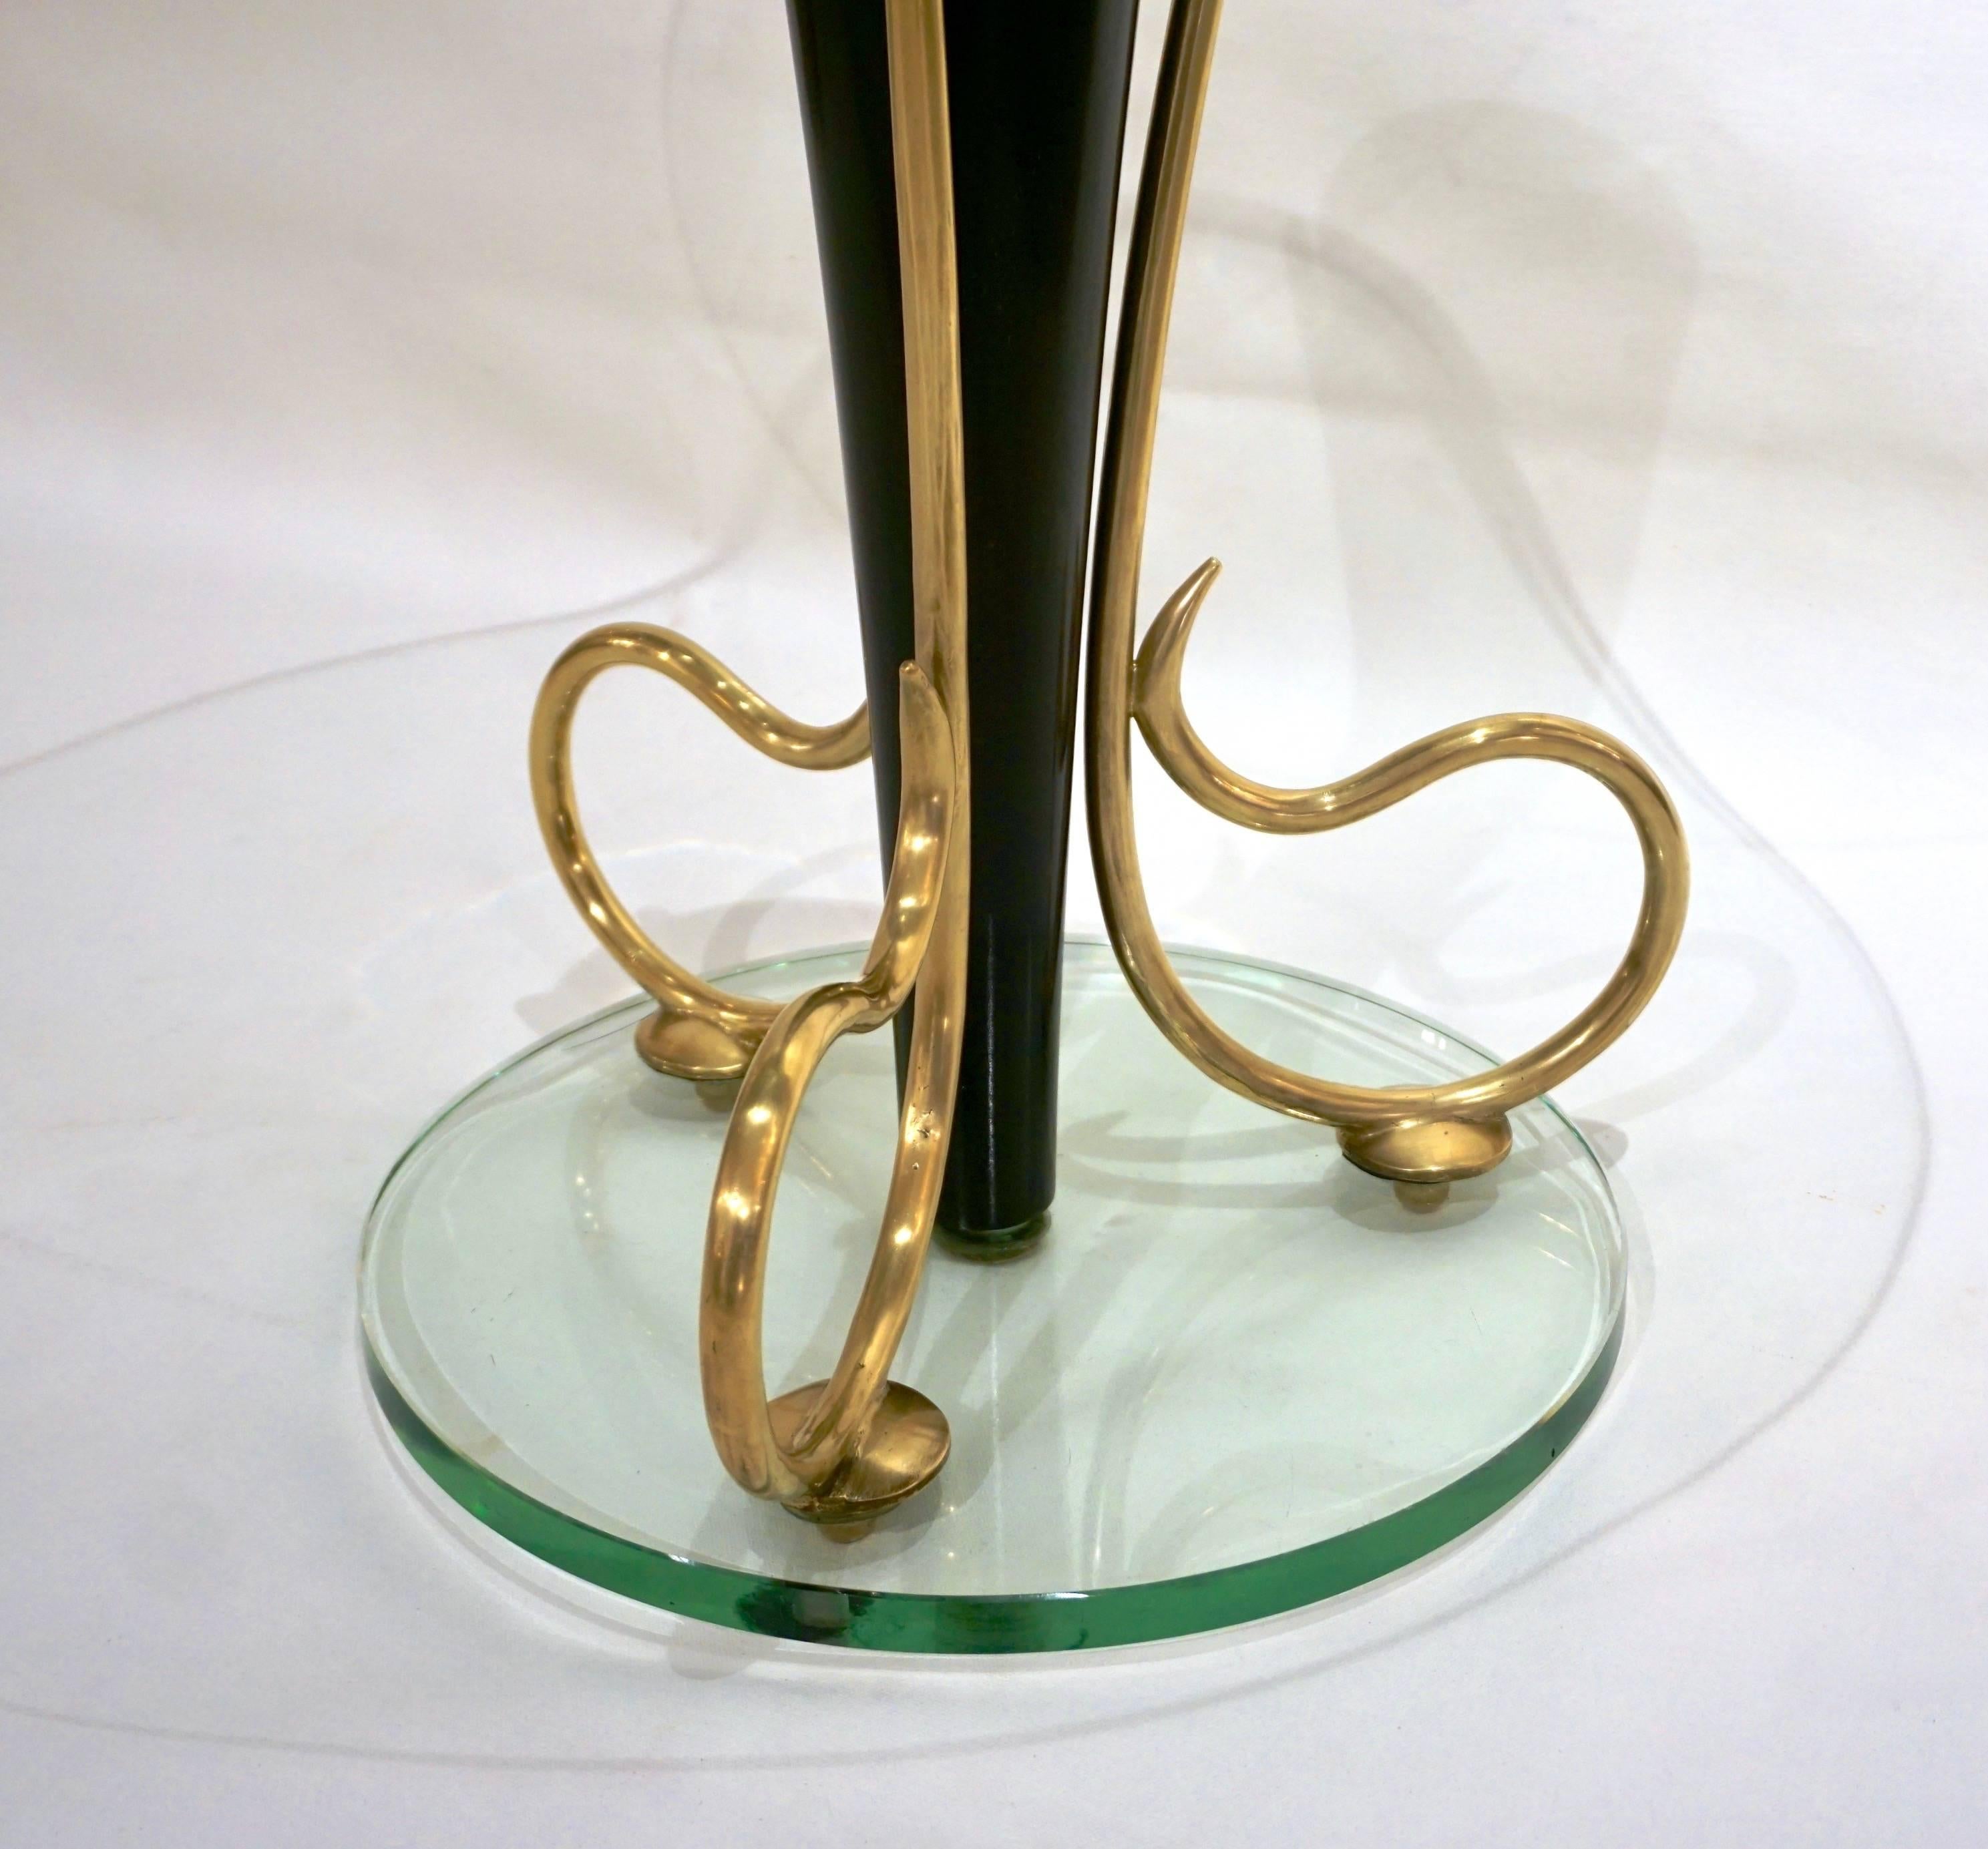 Beveled 1950s Italian Round Side Table with Black Lacquered Metal and Brass Scroll Decor